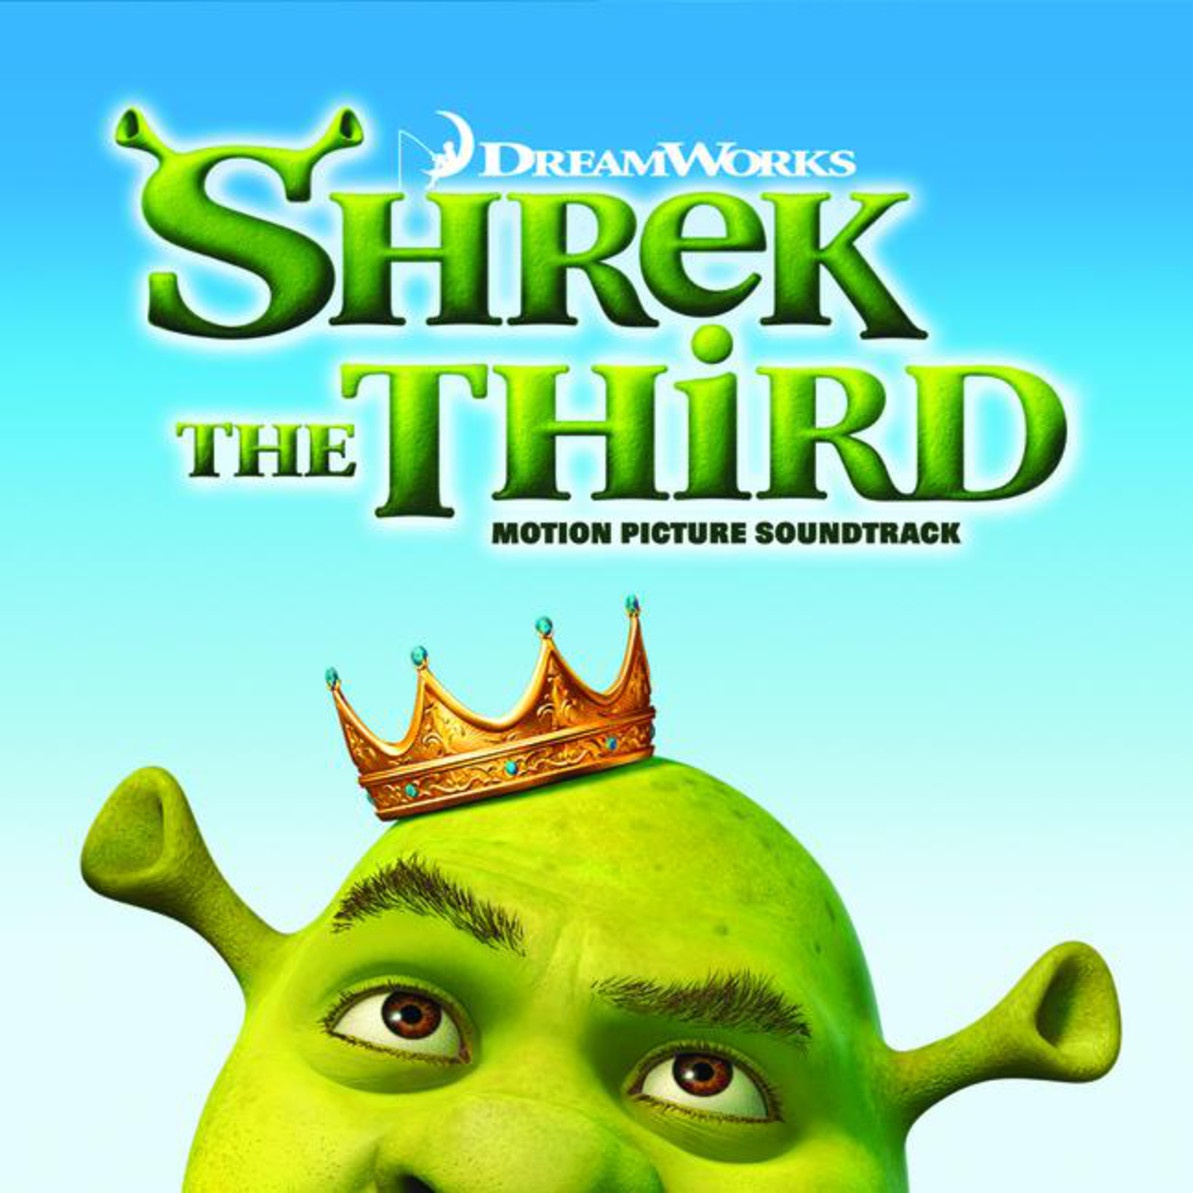 Shrek The Third (Motion Picture Soundtrack)